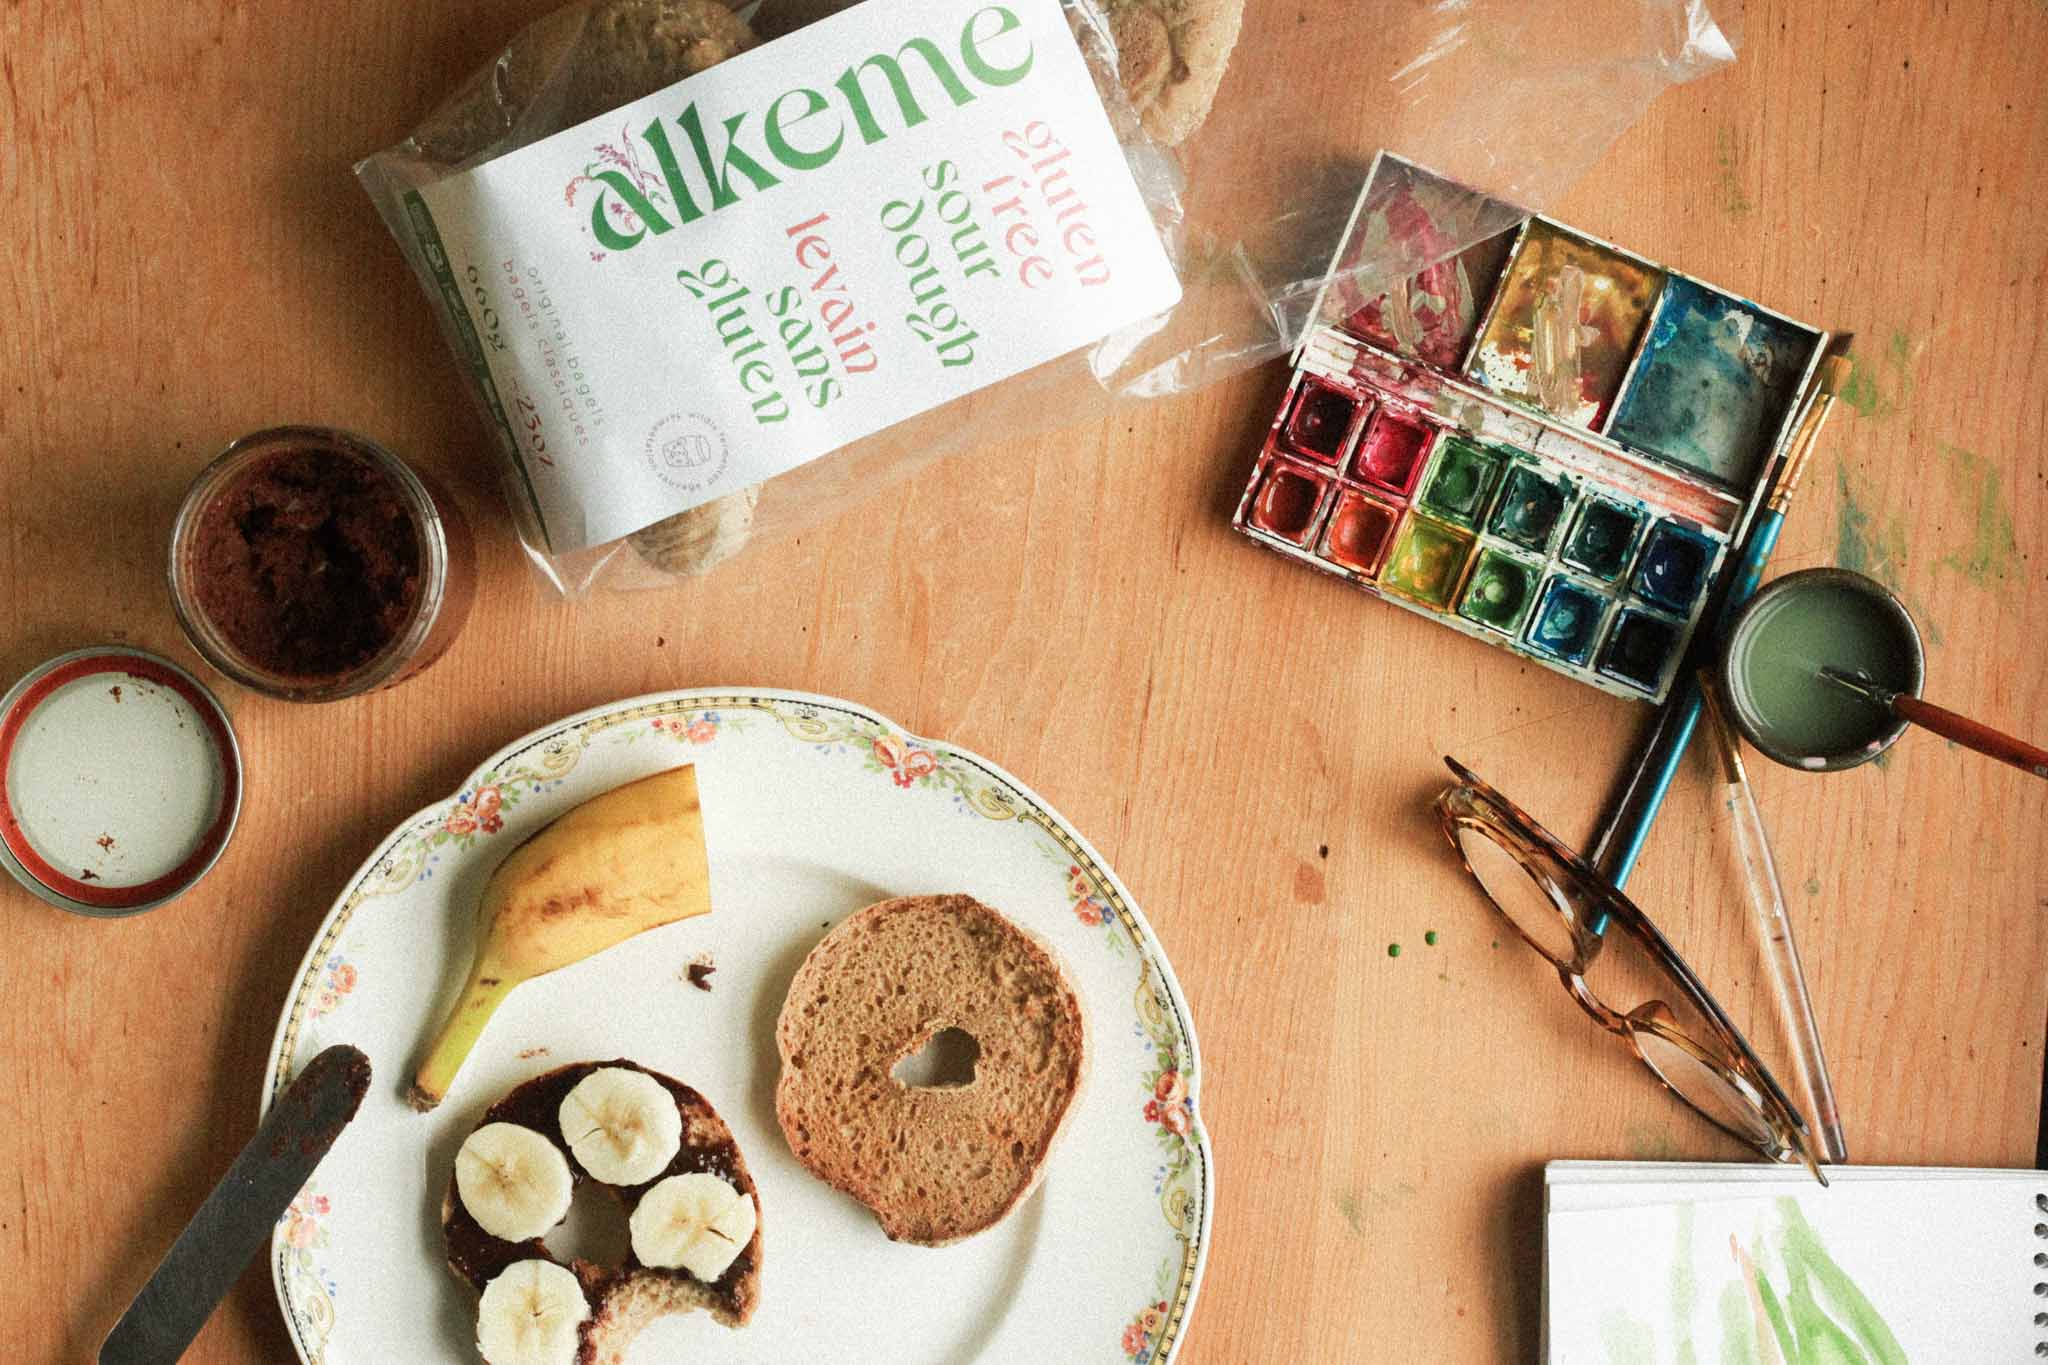 An image of alkeme Original Bagel, one half topped with homemade nutella and banana slices and the other half waiting to be topped. Paints and a sketch book and glasses off in one corner and alkeme bagel packaging at the top of the frame.